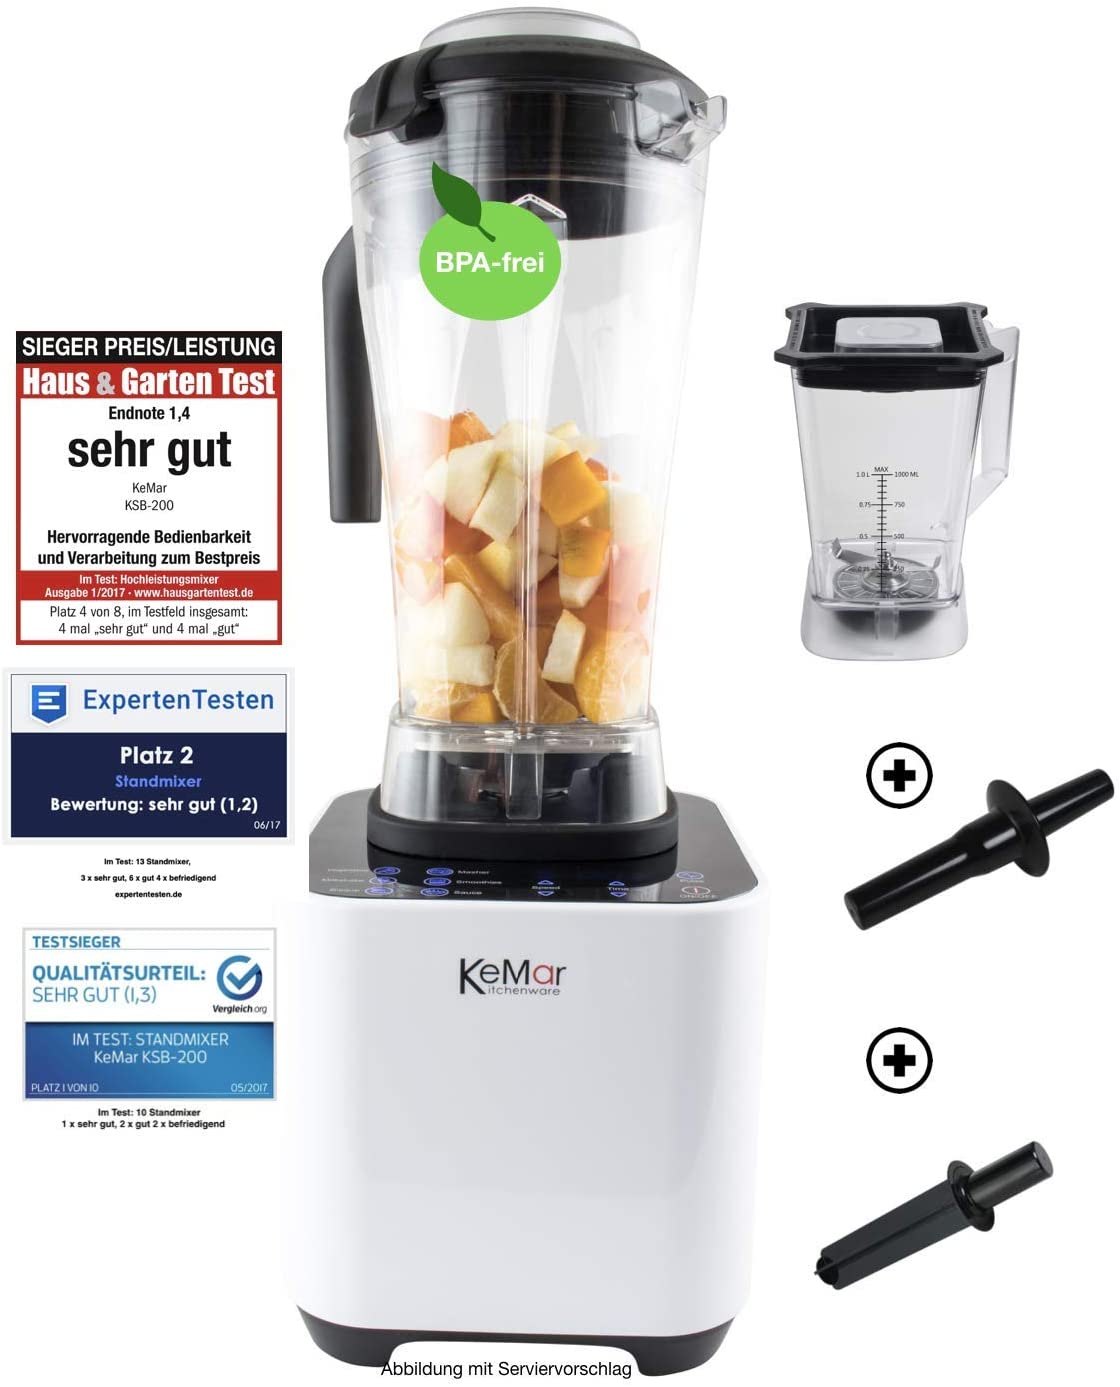 KeMar Kitchenware KSB-200 High Performance Blender, Stand Mixer, LED Touch Control, 1500 W, 30,000 rpm, Includes 1 + 2 Litre Container, BPA-Free, 6 Programmes, Manual Adjustment, White